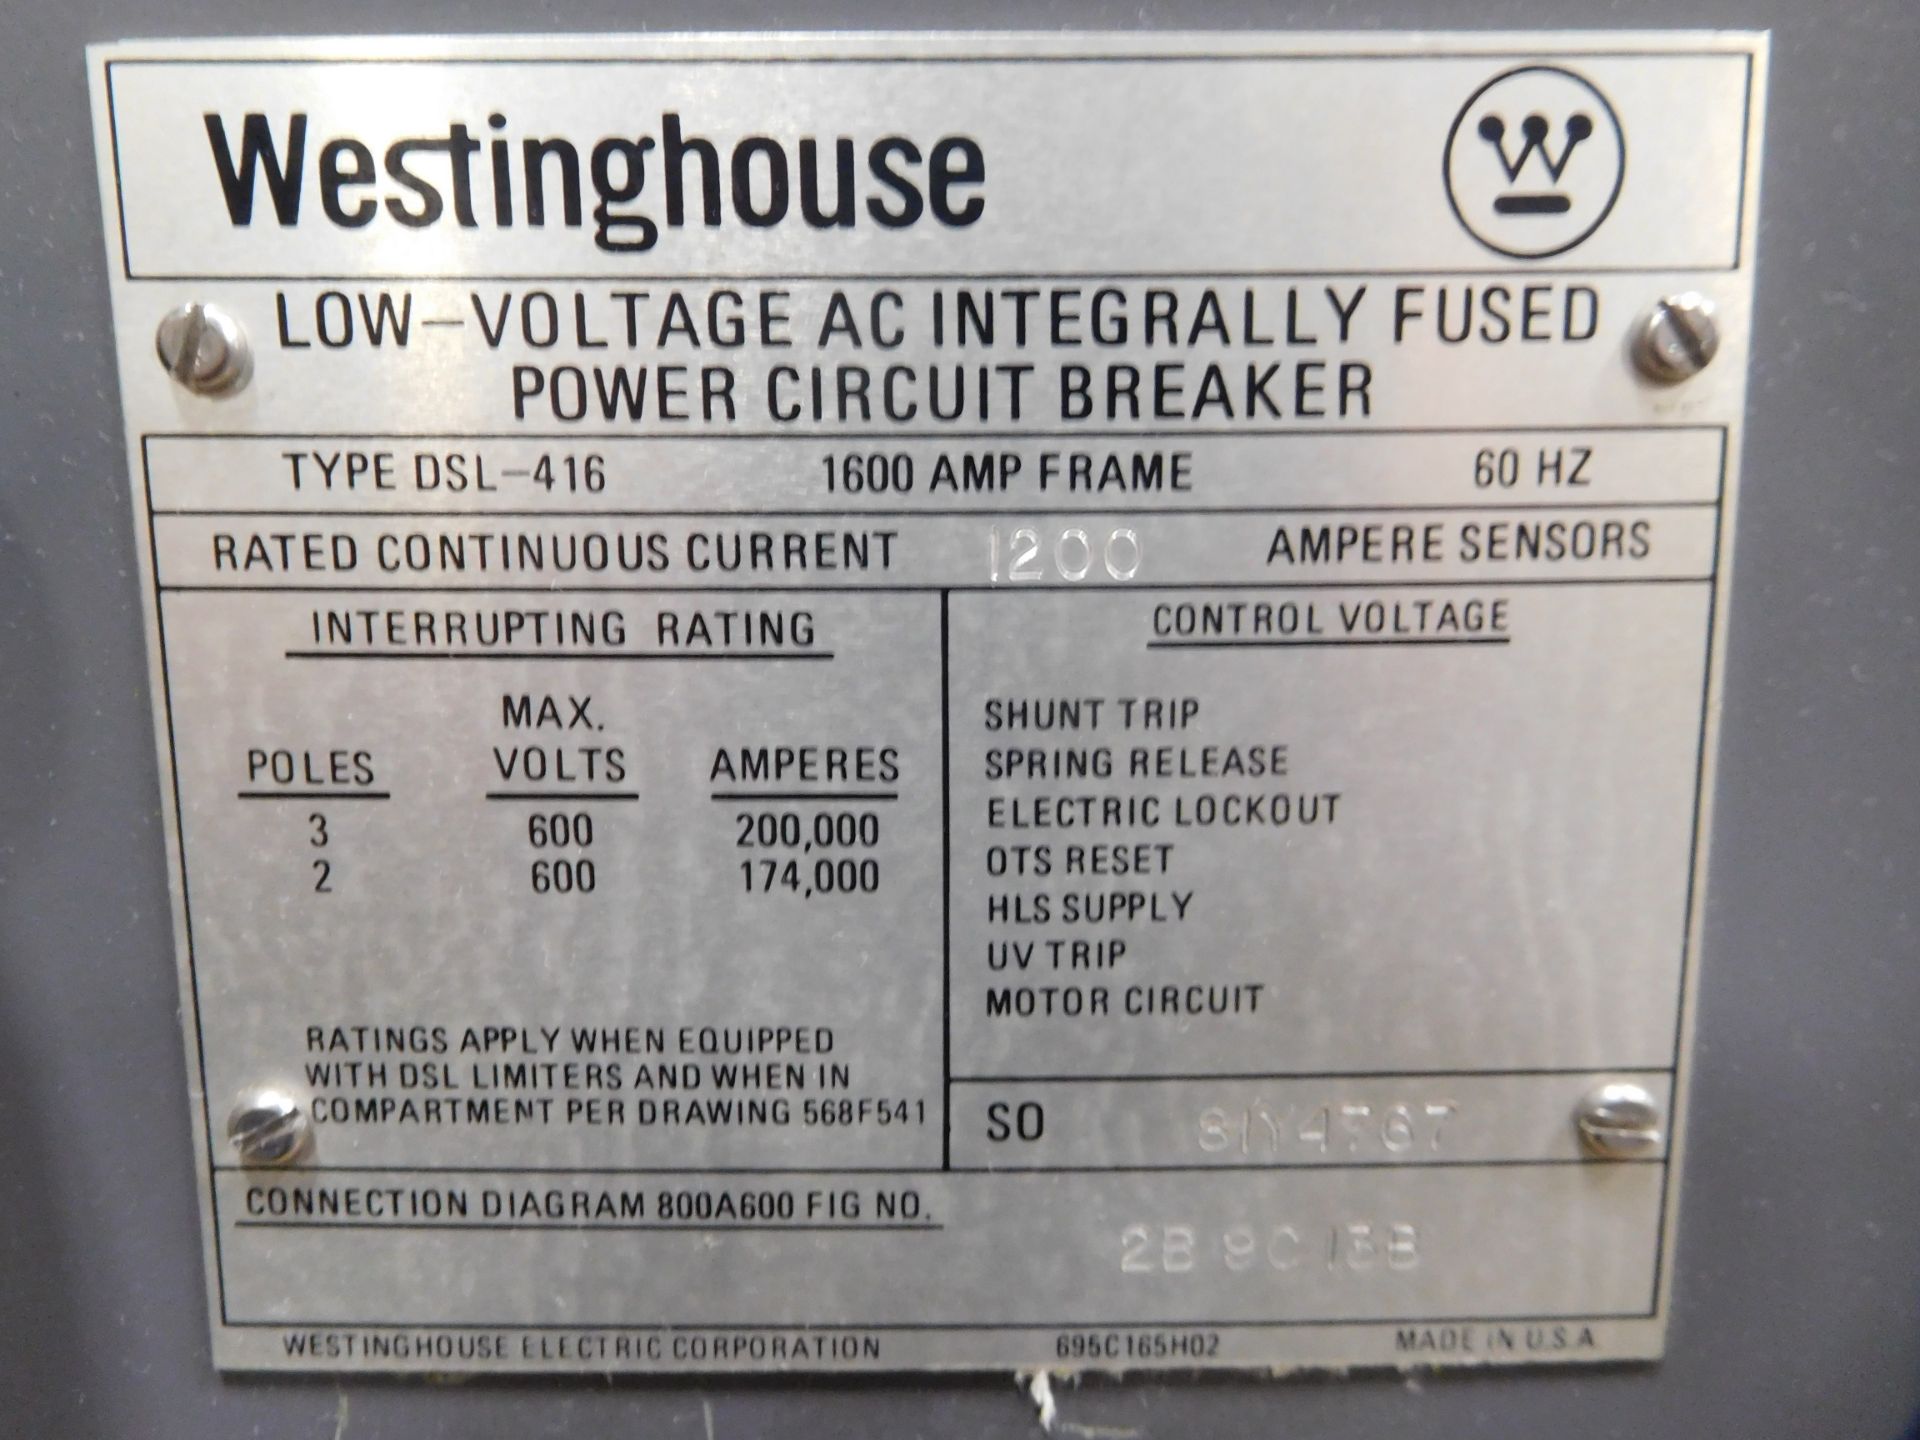 Westinghouse DSL-416 1600 Amp Low-Voltage AC Integrally Fused Power Circuit Breaker - Image 2 of 9